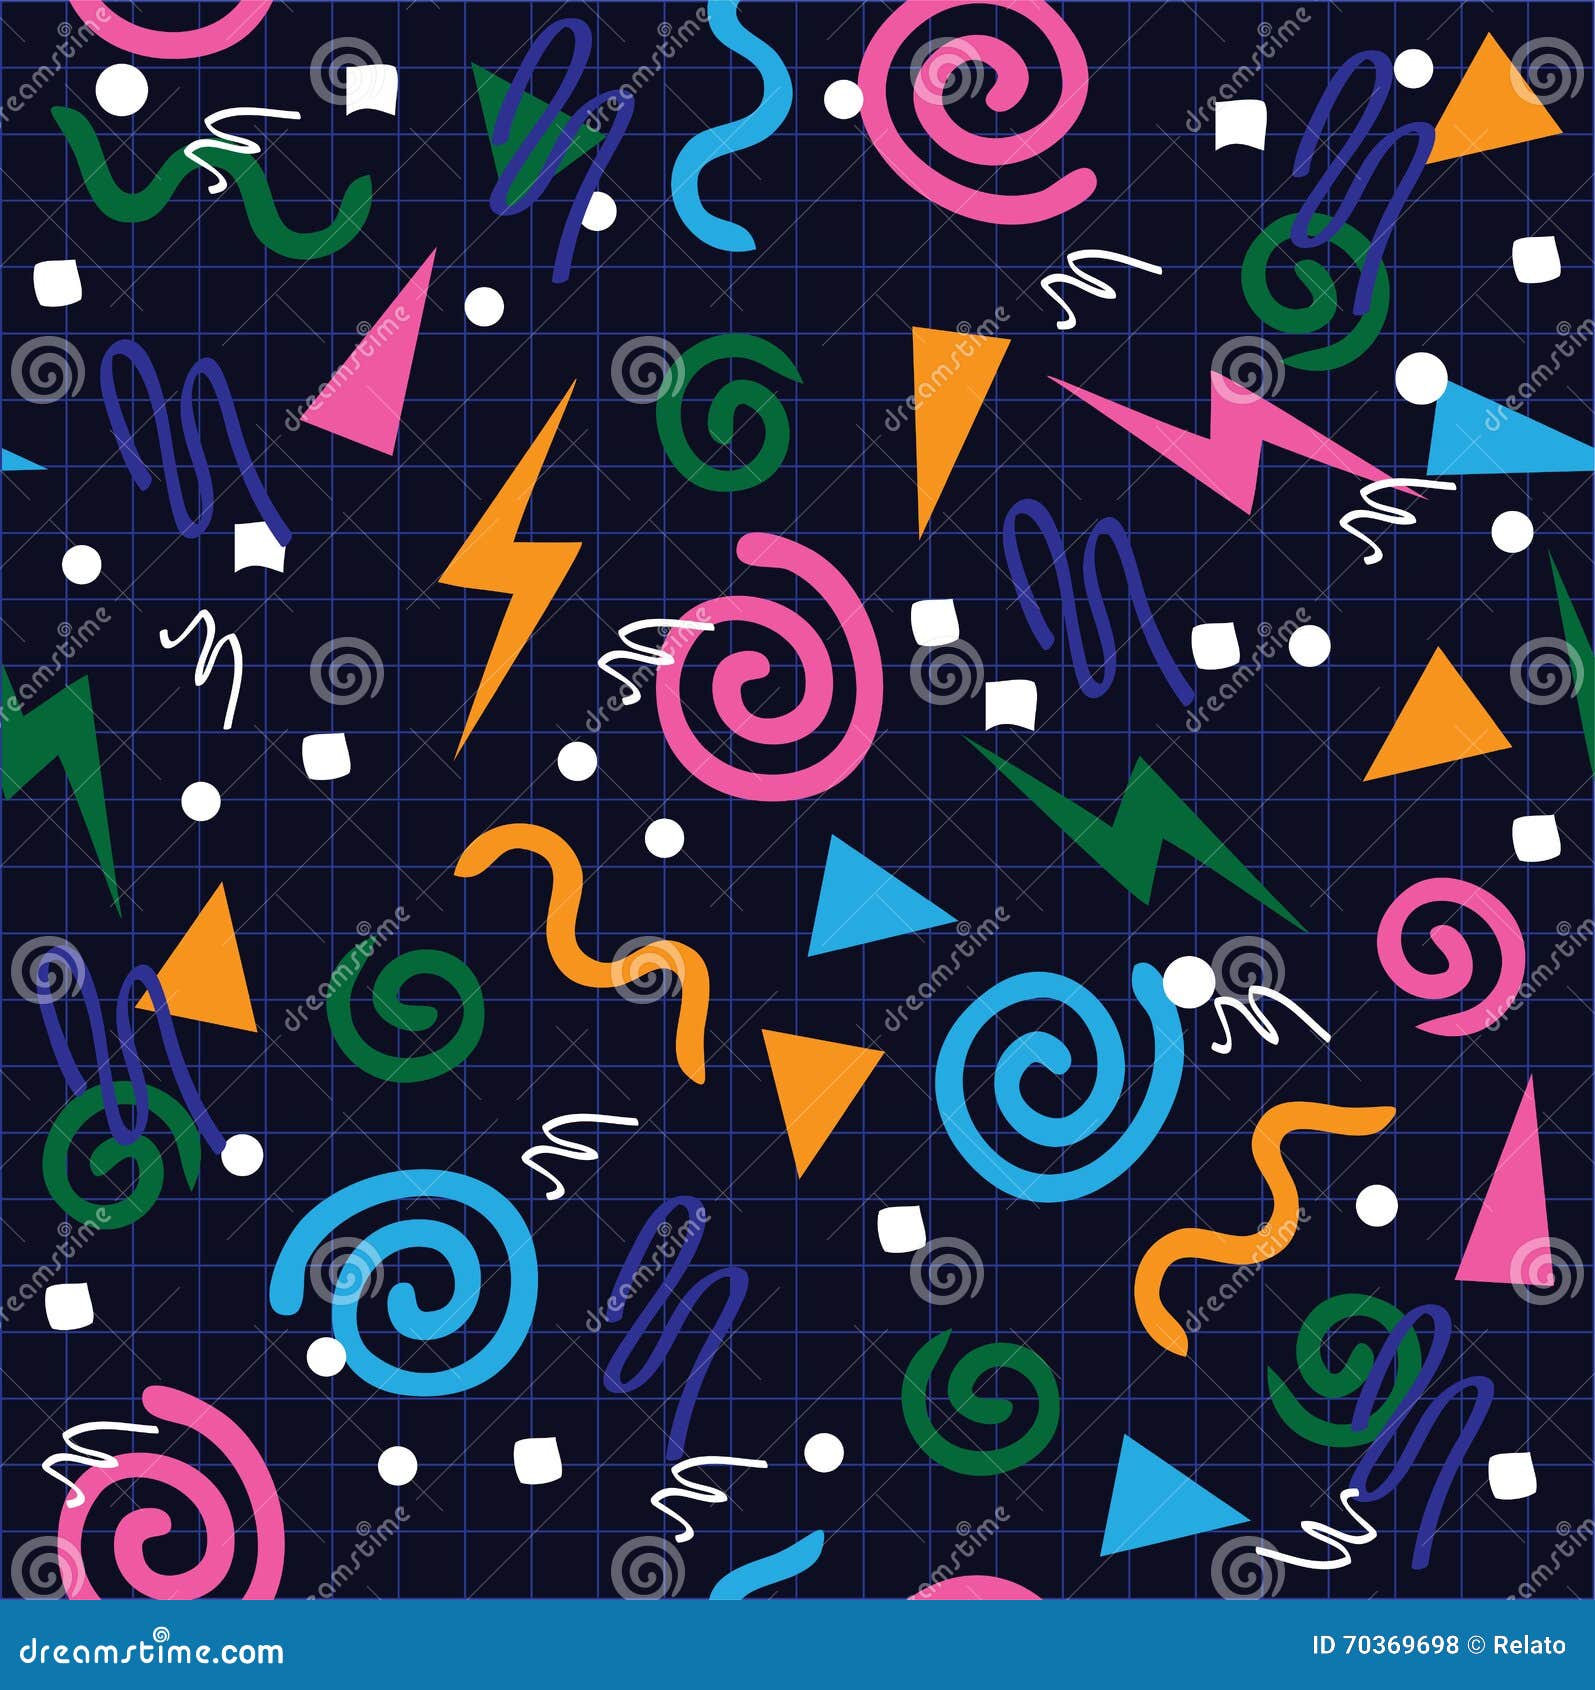 arcade texture carpet of background 80s vector. 90s Illustration stock or